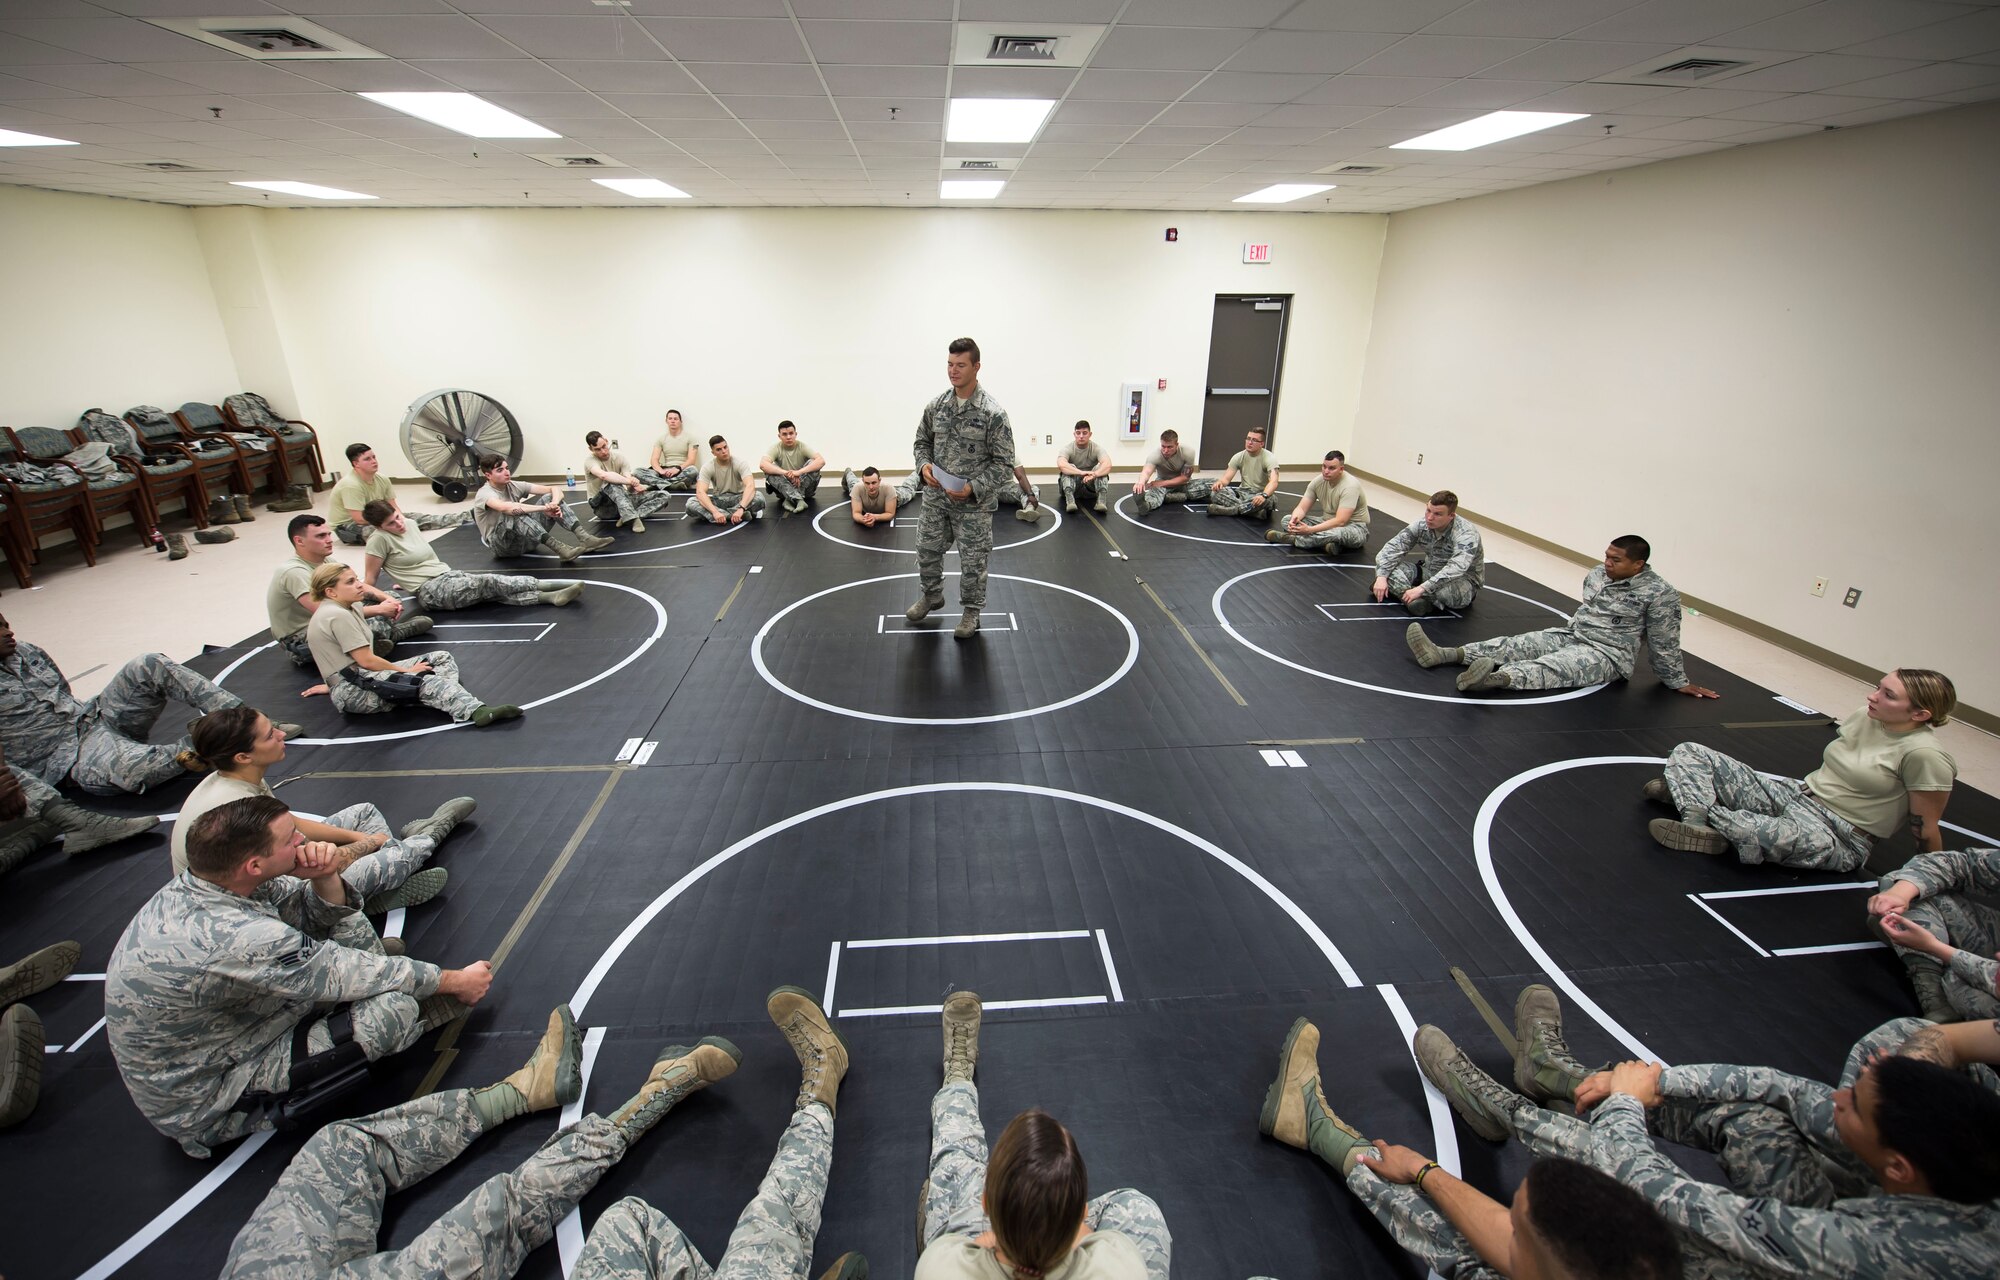 U.S. Air Force Staff Sgt. Barry O’Brien, 20th Security Forces Squadron combatives trainer, briefs Airmen during a combatives training at Shaw Air Force Base, S.C., Sept. 5, 2018.